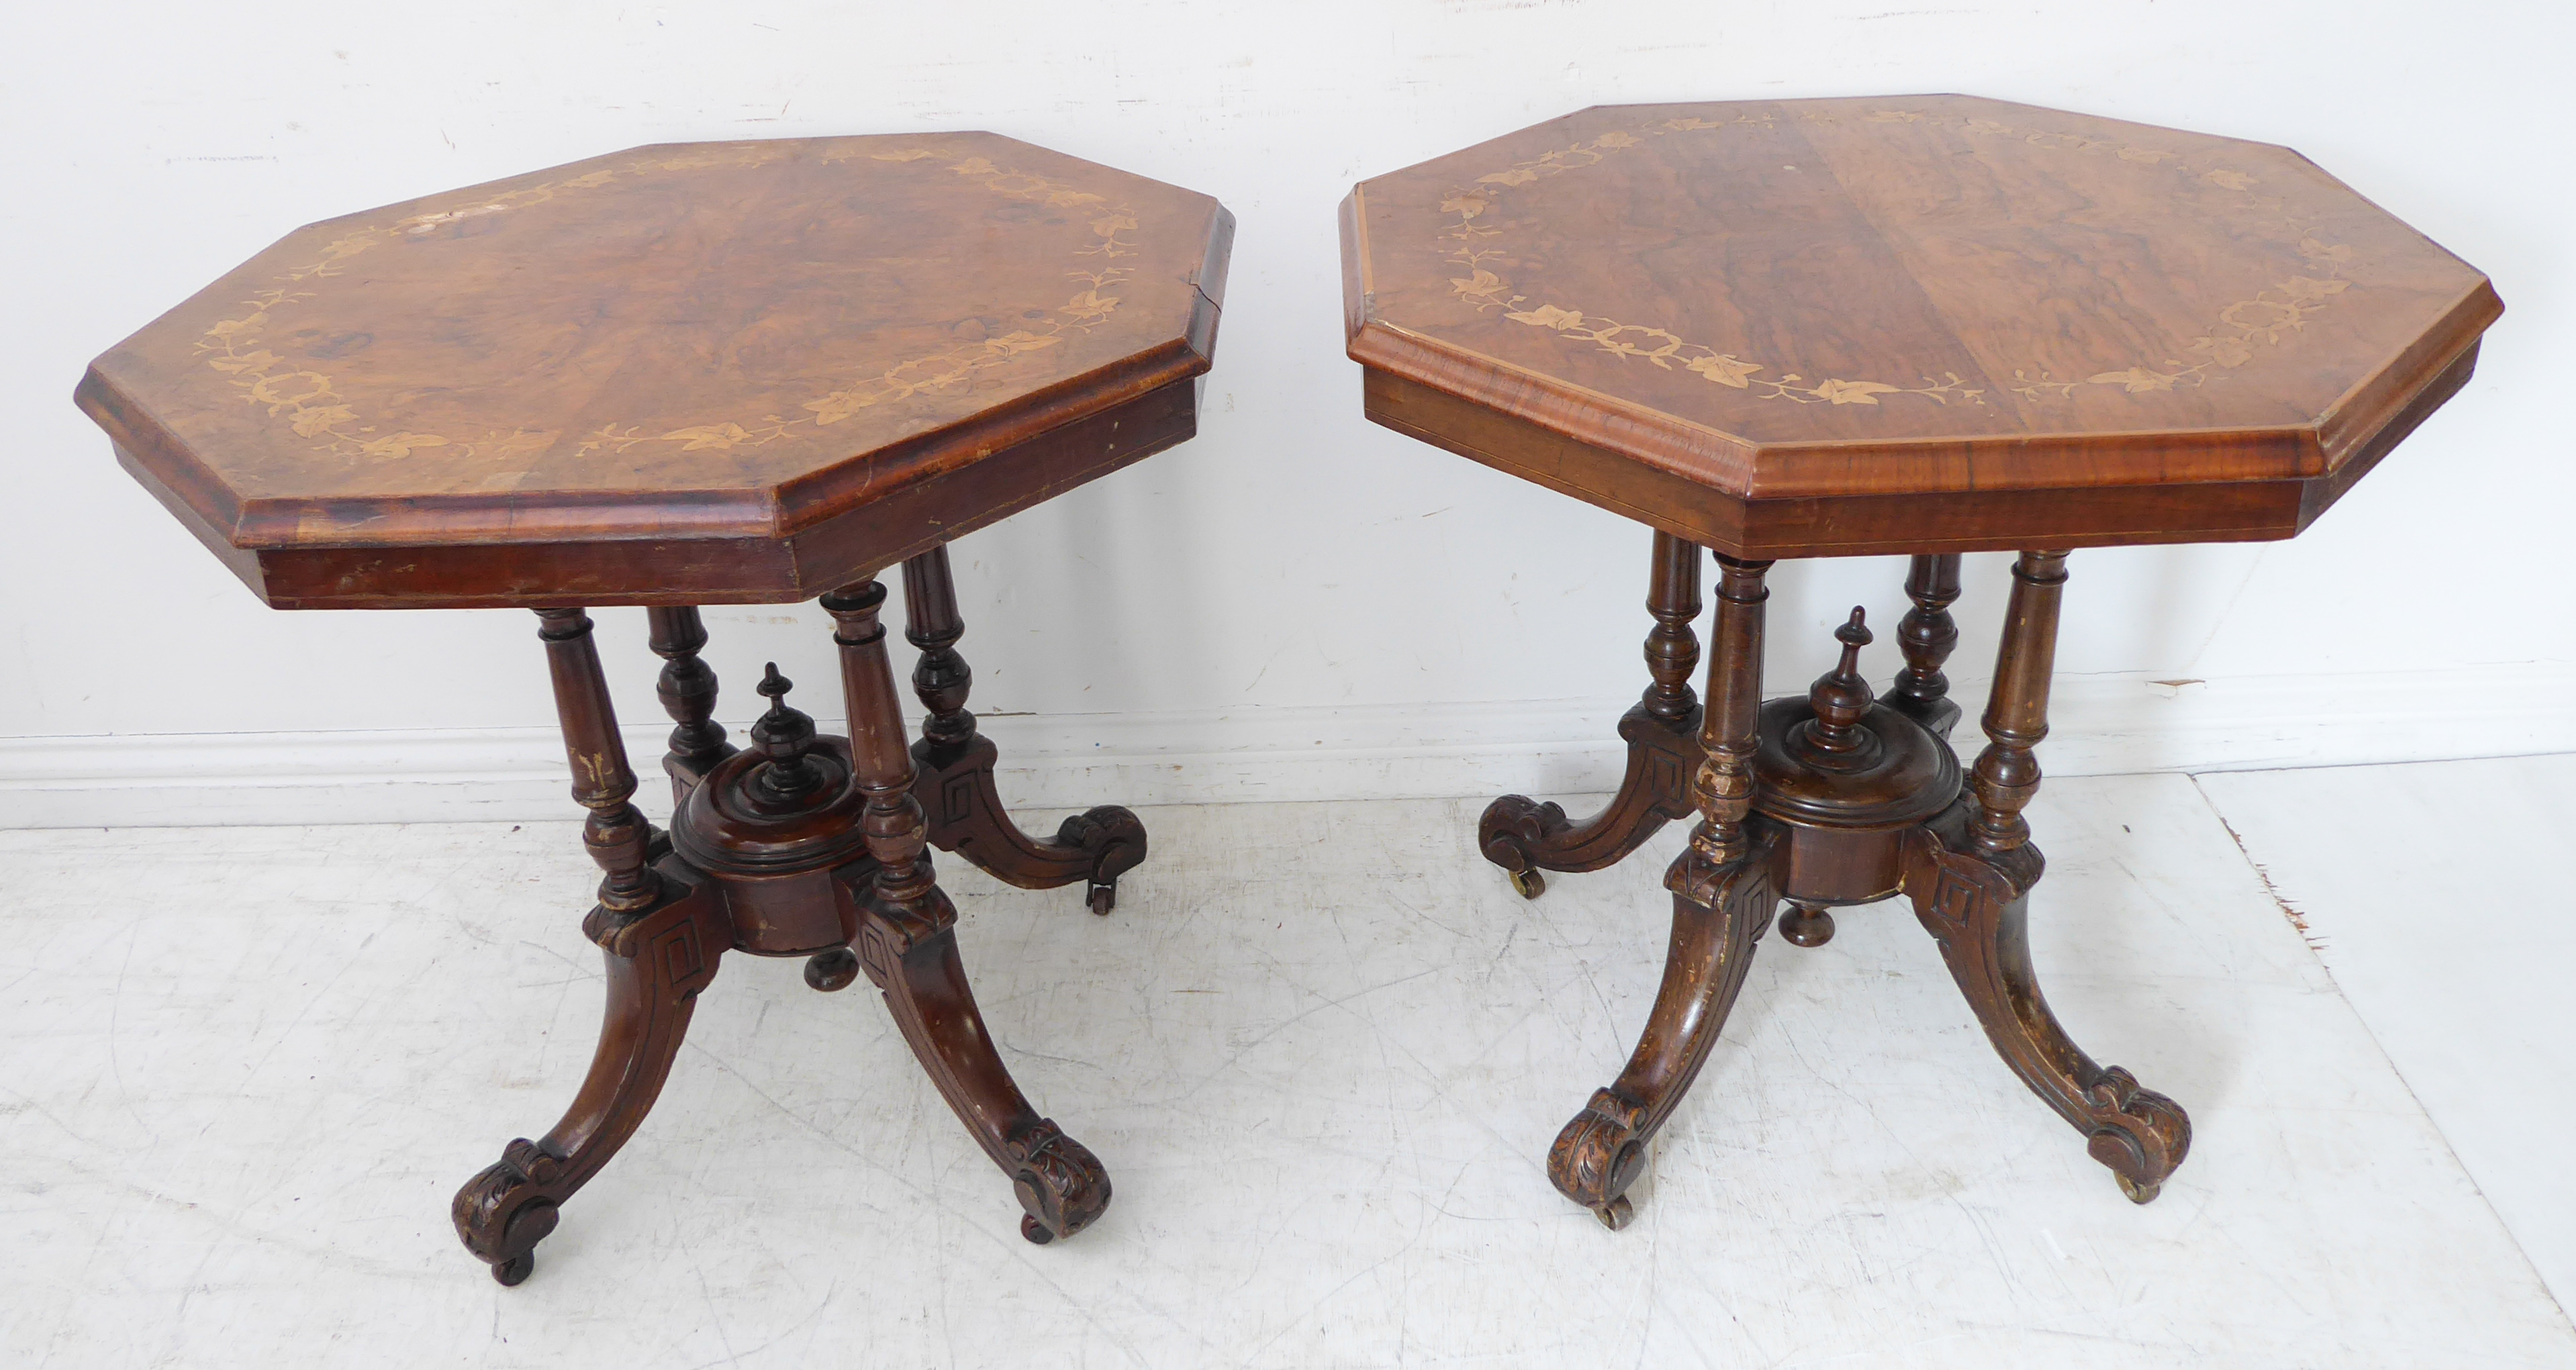 A pair of octagonal quarter-veneered walnut centre tables: each with laurel leaf style marquetry